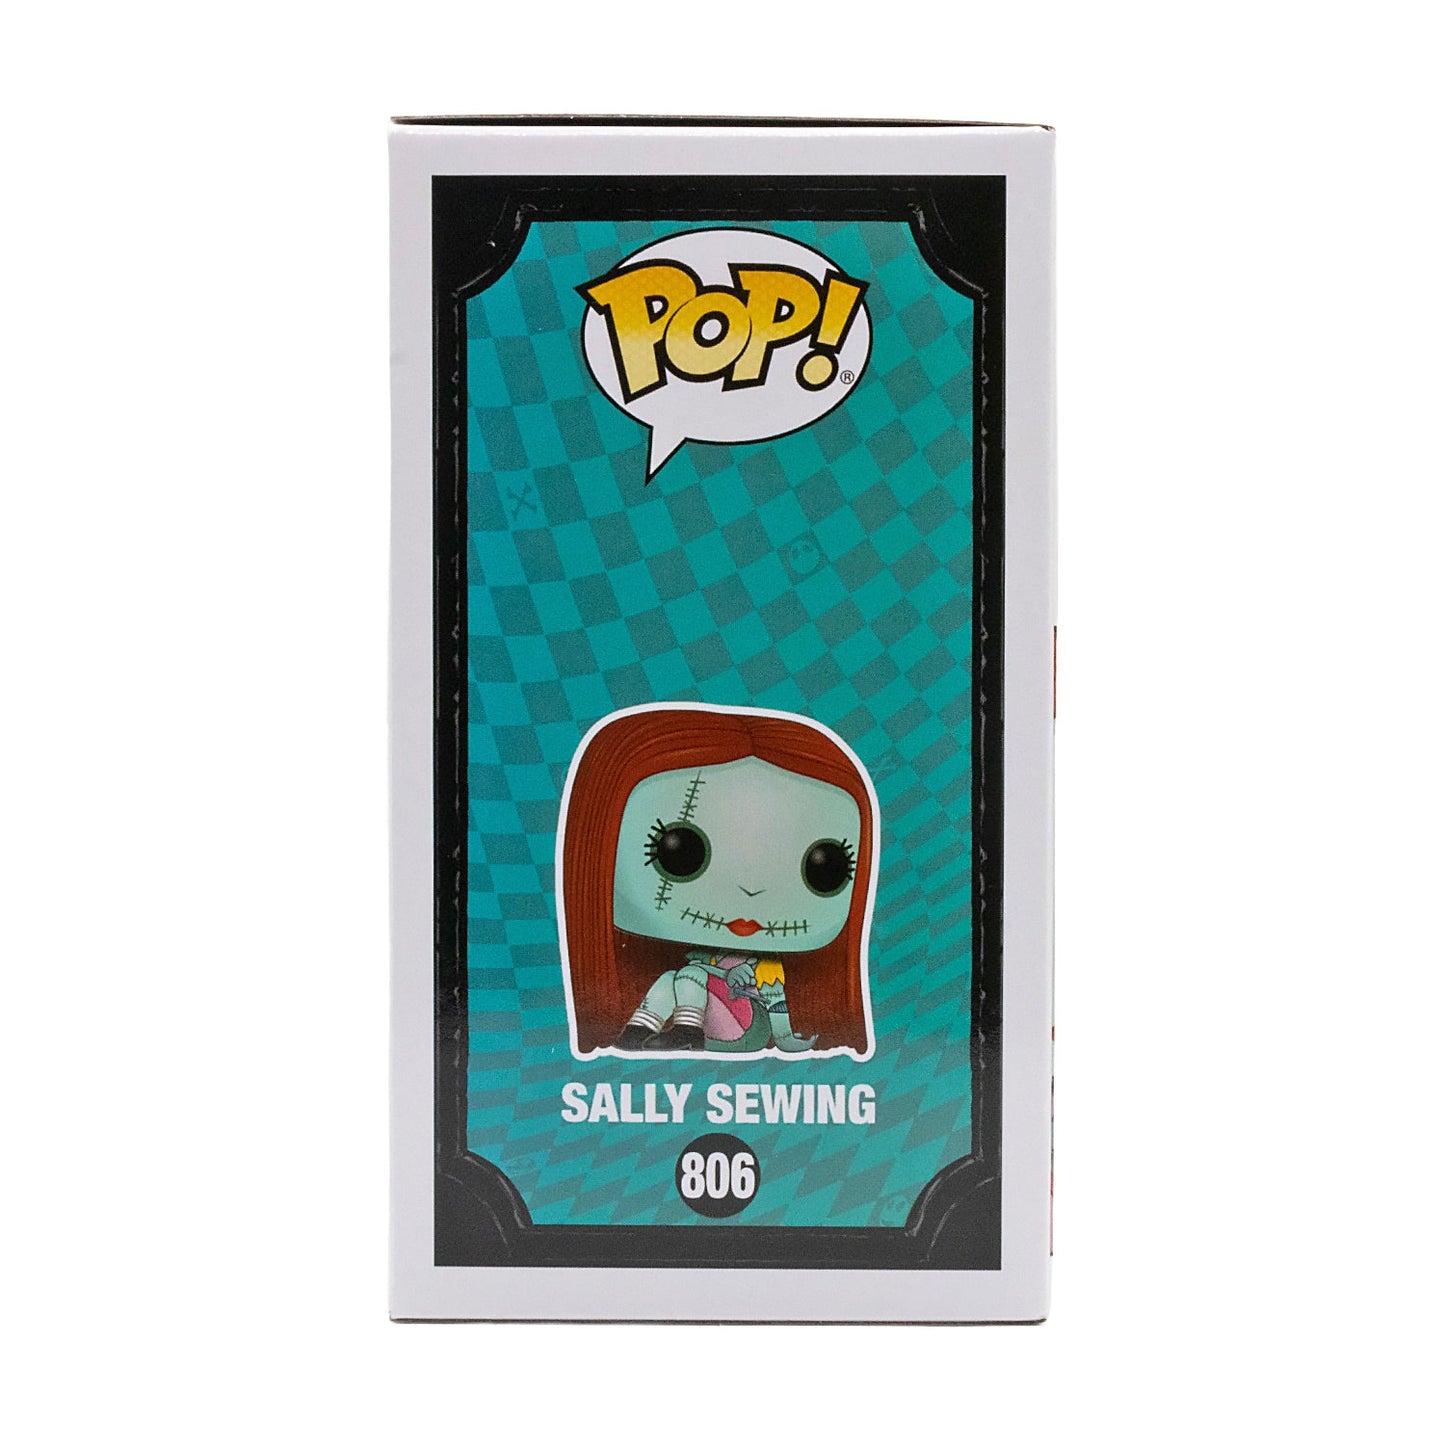 Funko Pop! The Nightmare Before Christmas Sally Sewing #806